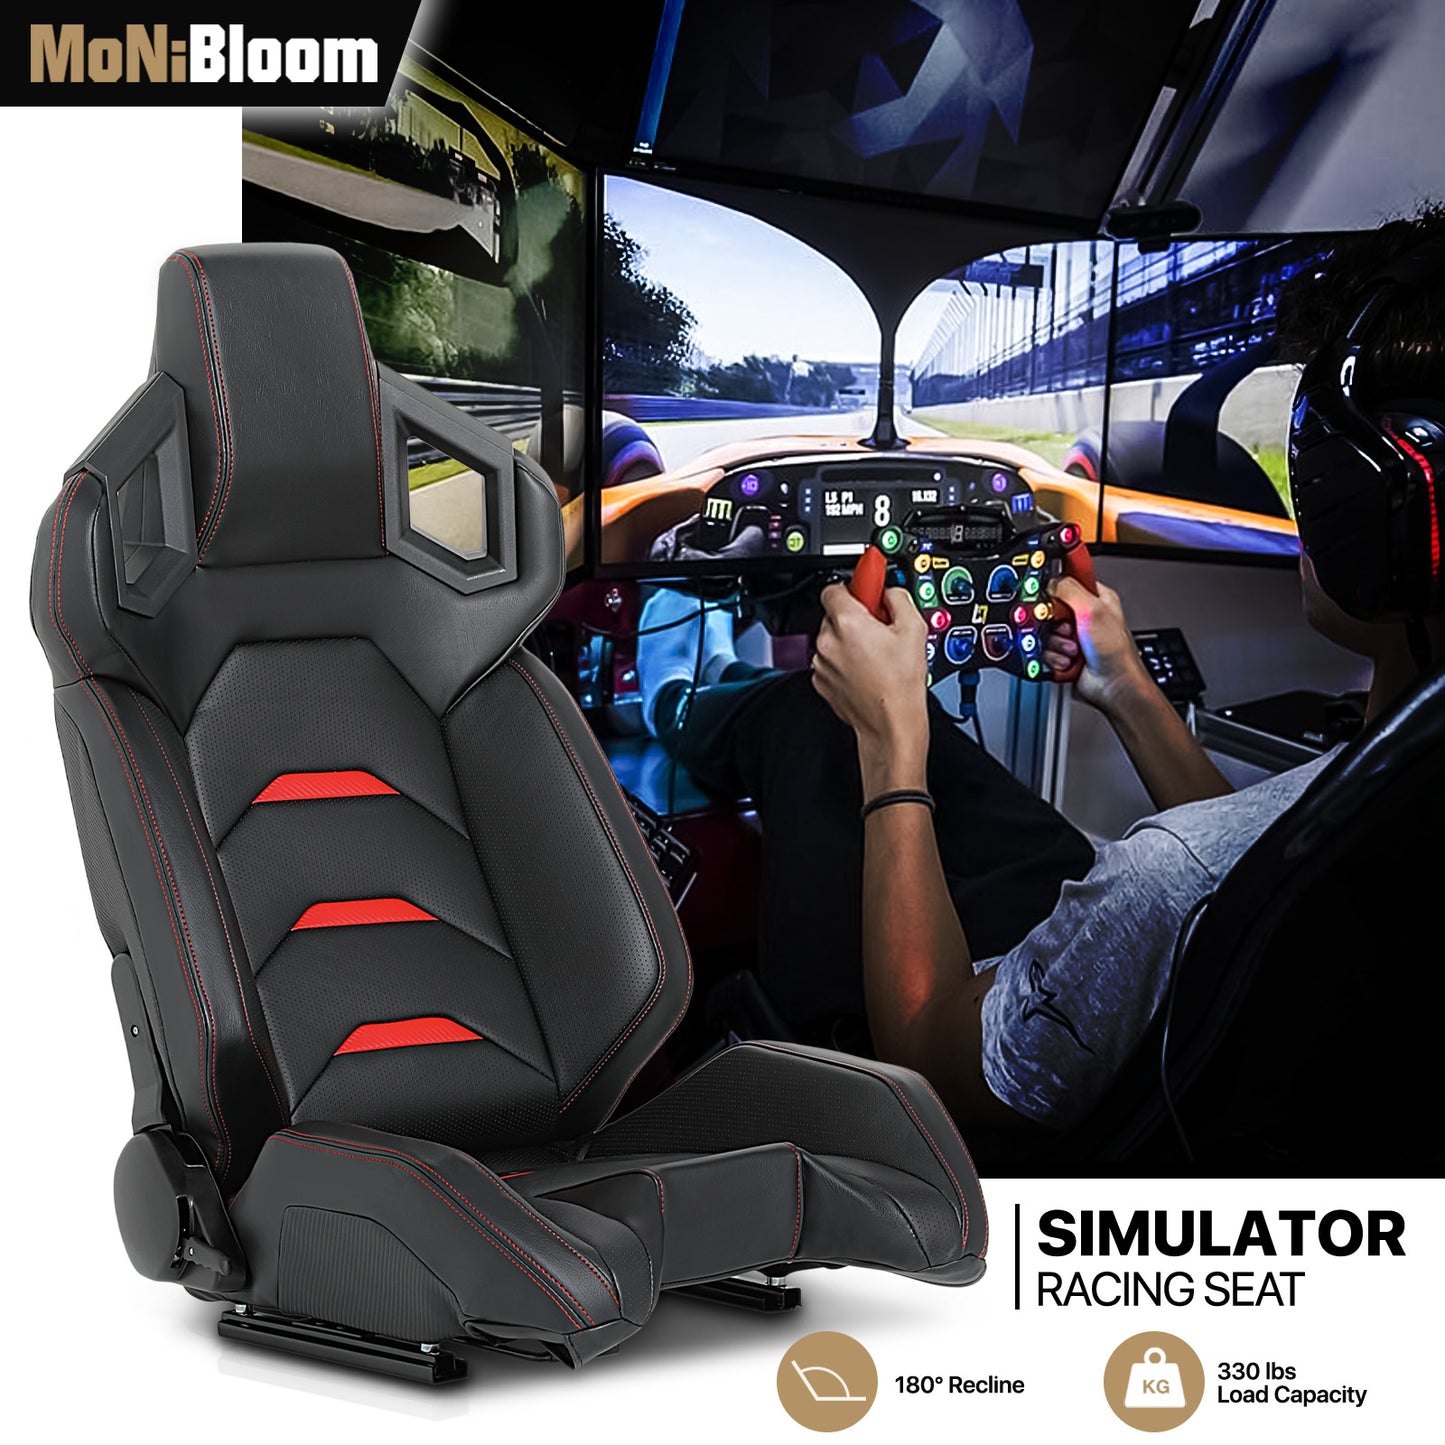 PU leather Gaming Seat - Red - For Racing Simulator